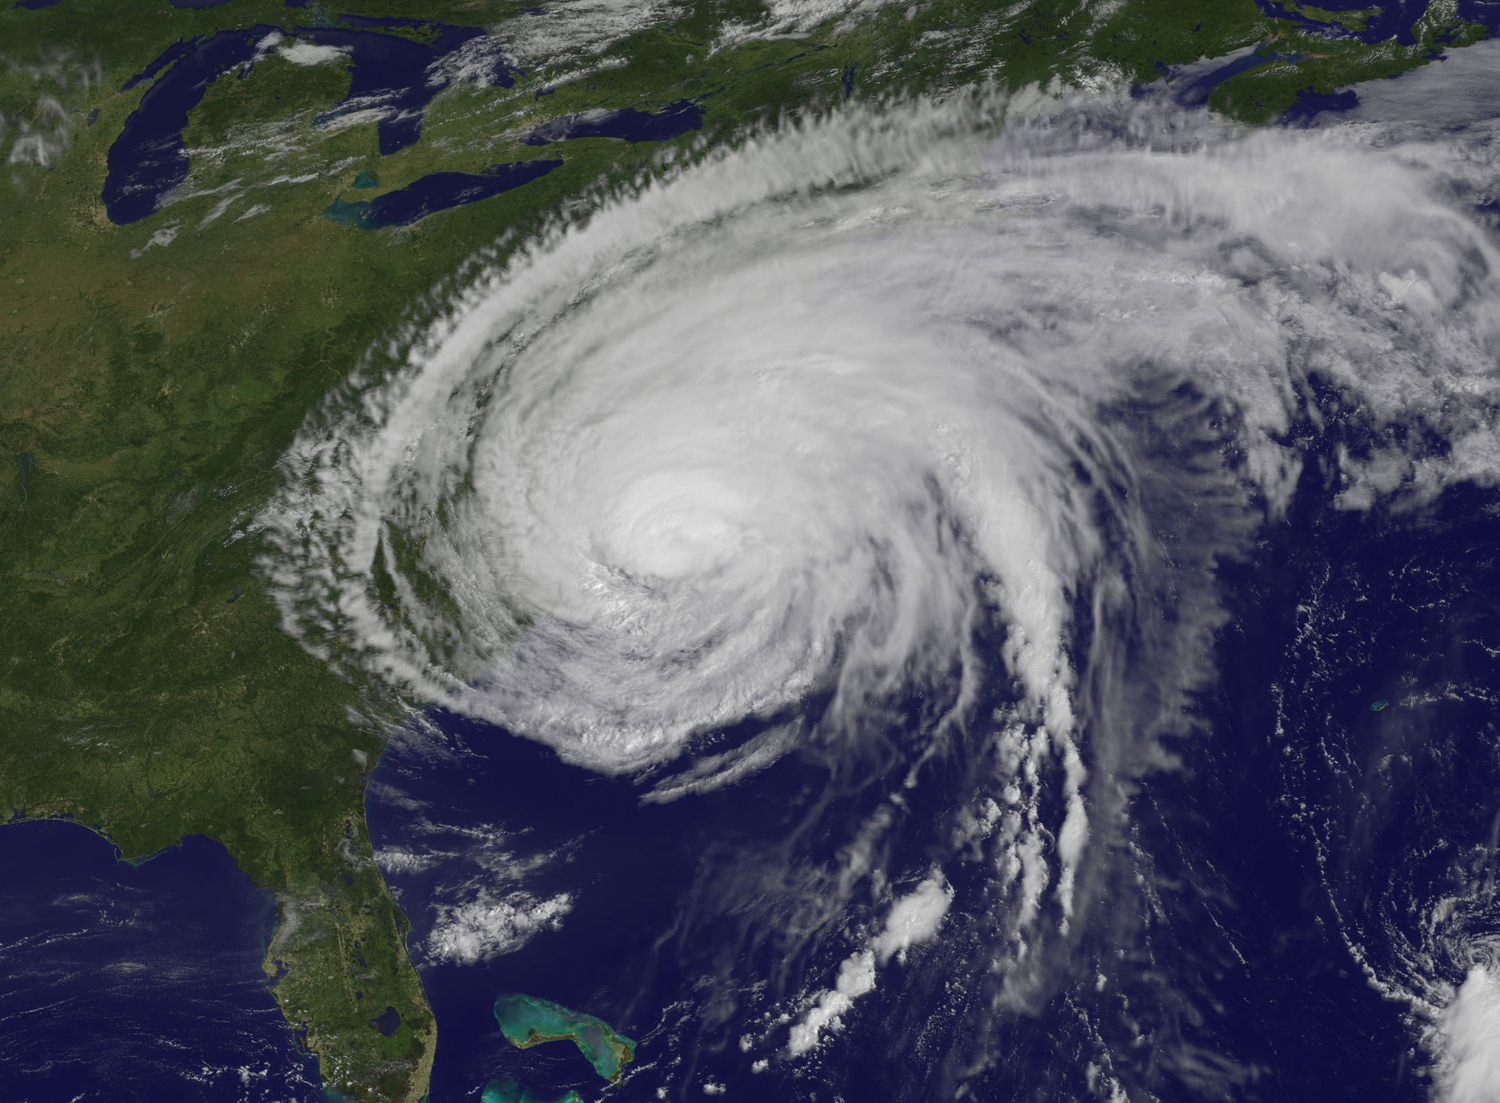 Hurricanes, Typhoons, Cyclones: What's the Difference?